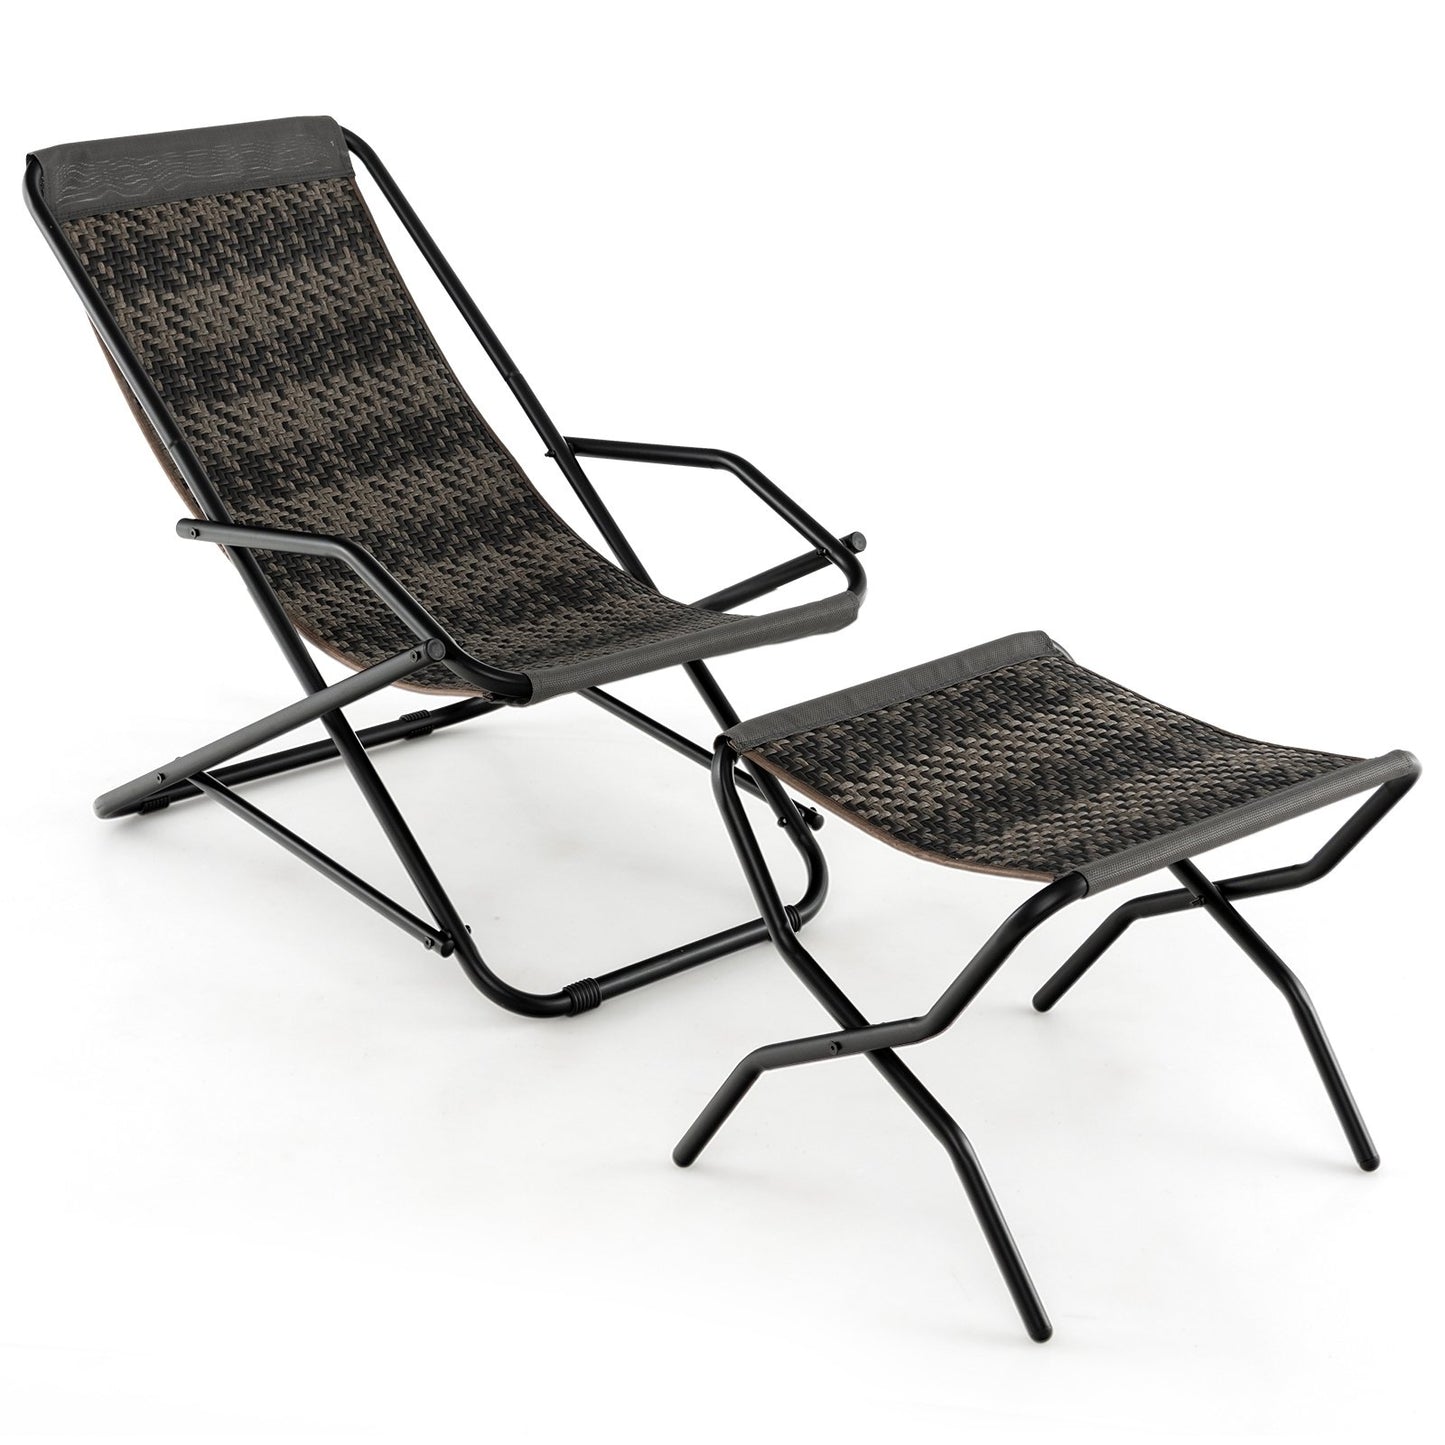 Patio PE Wicker Rocking Chair with Armrests and Metal Frame, Gray